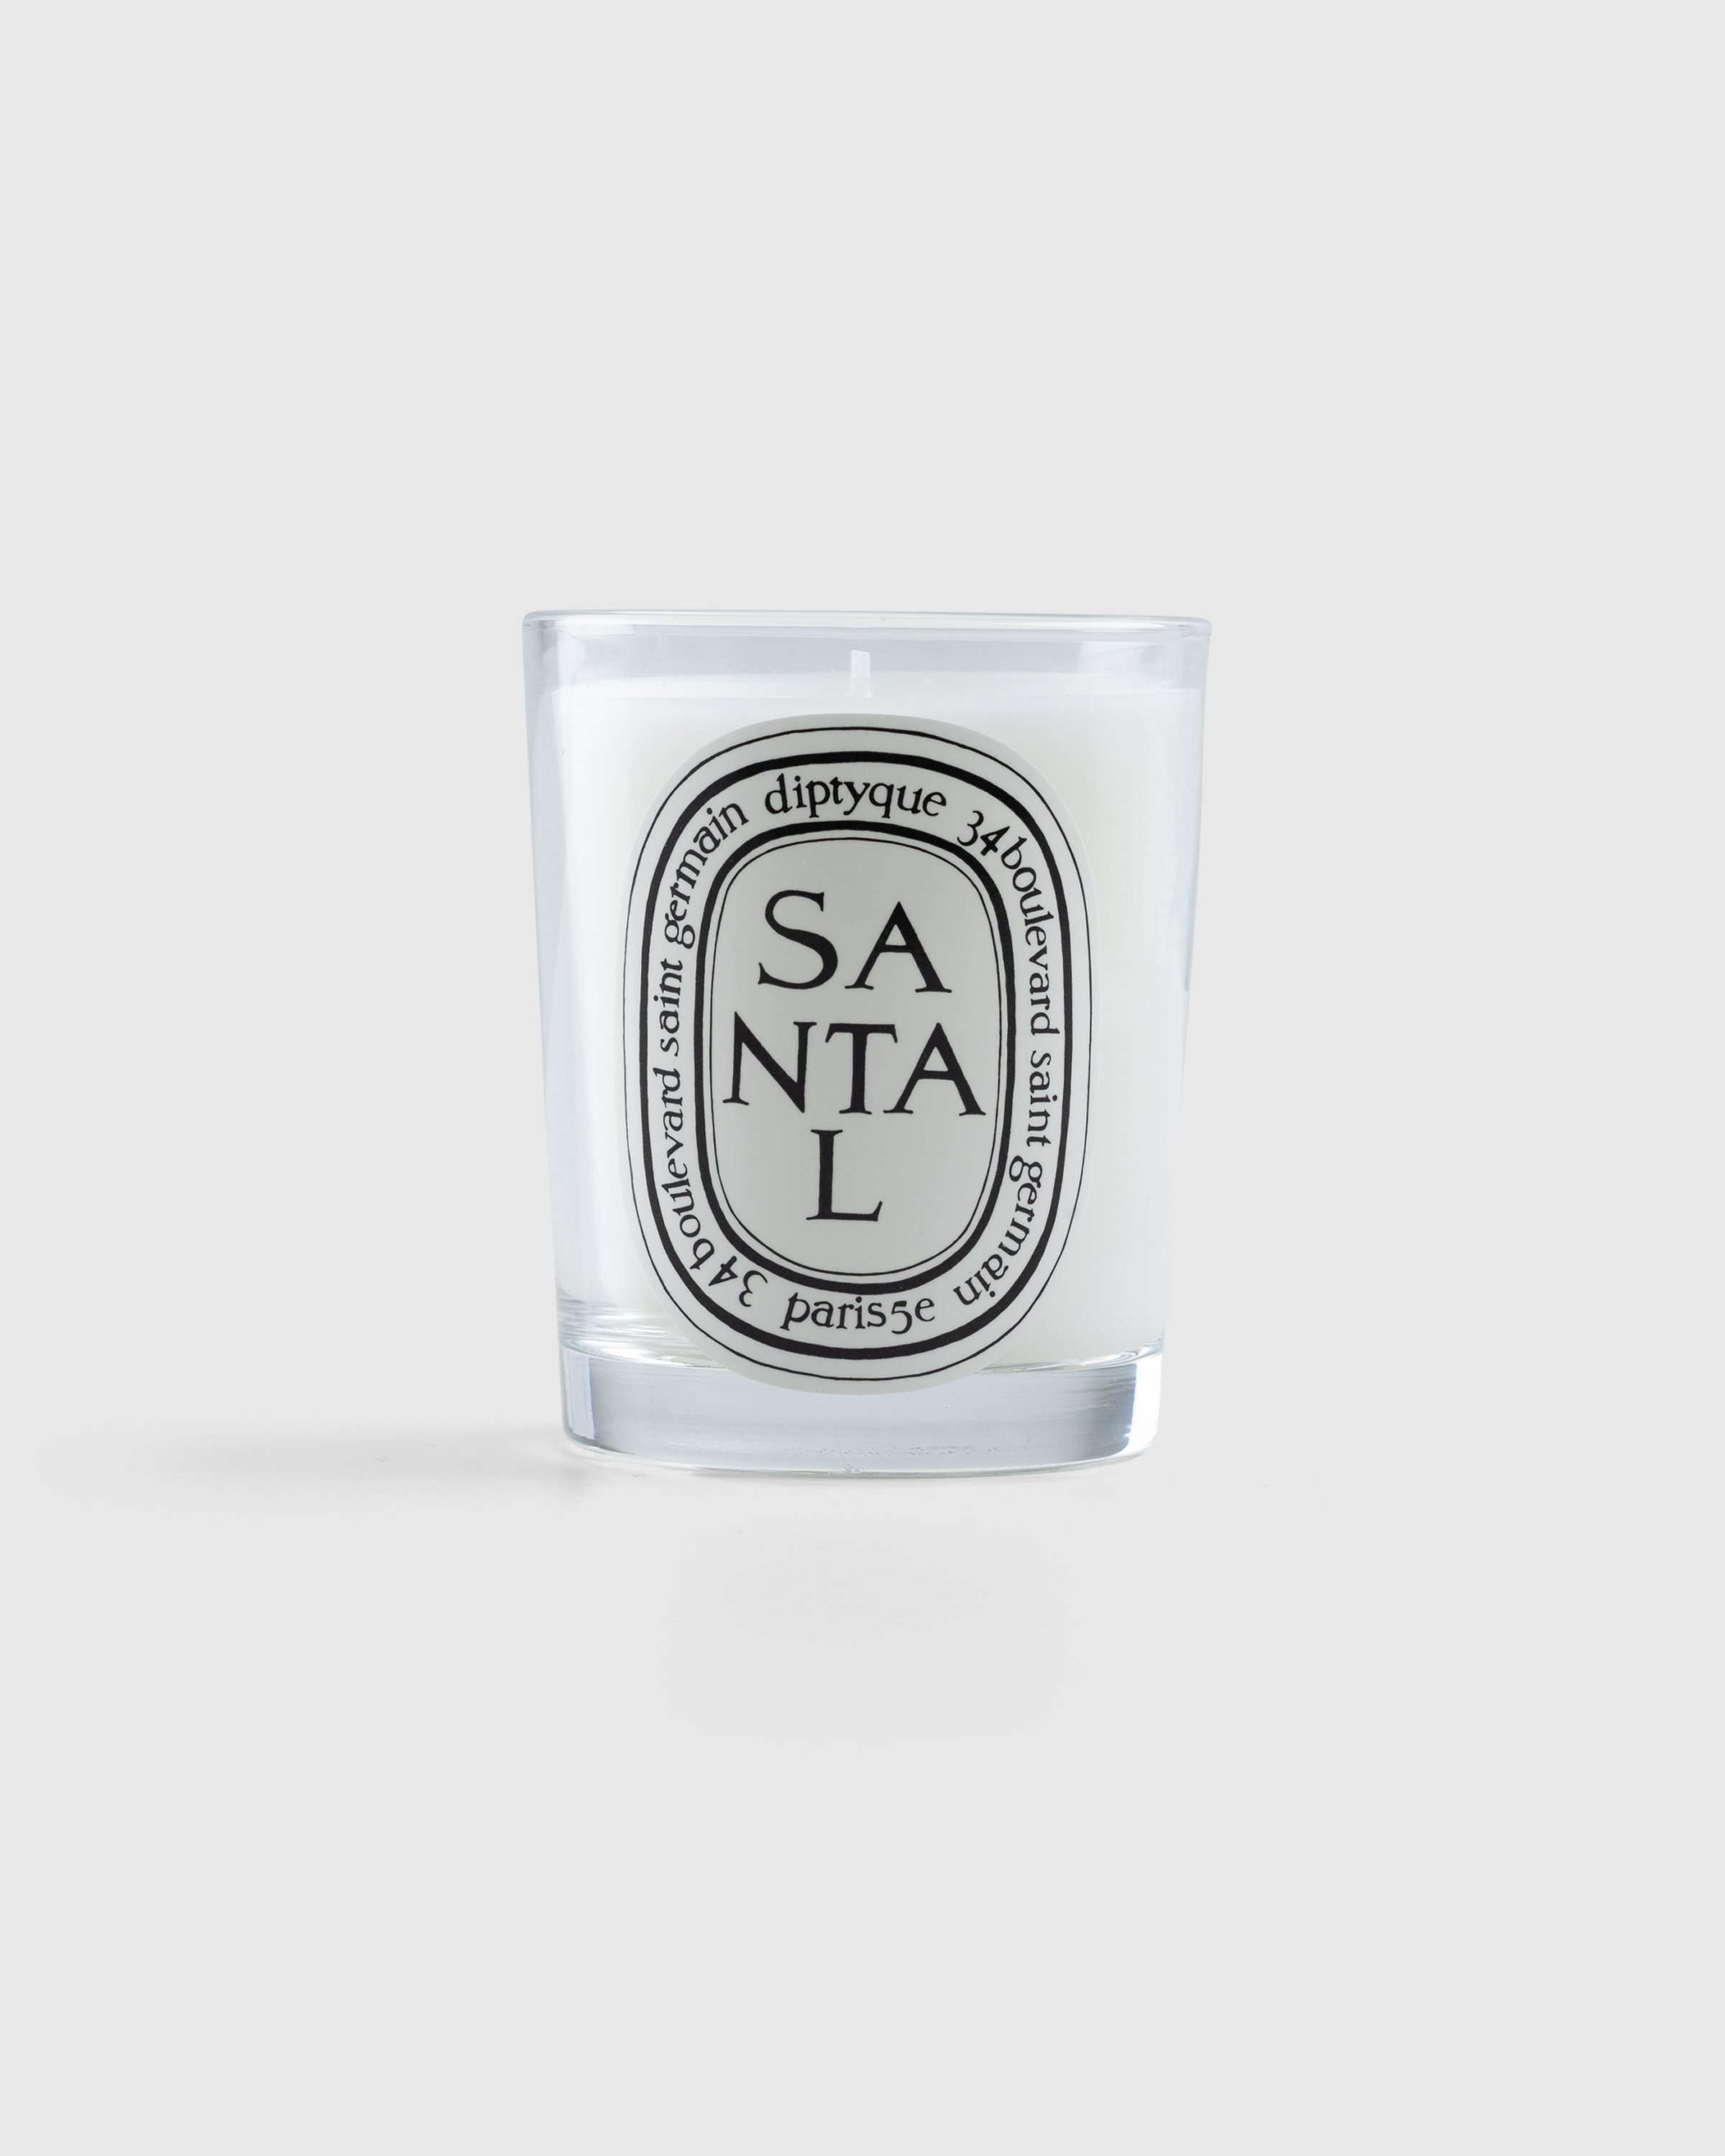 Diptyque – Standard Candle Santal 190g - Candles - White - Image 1